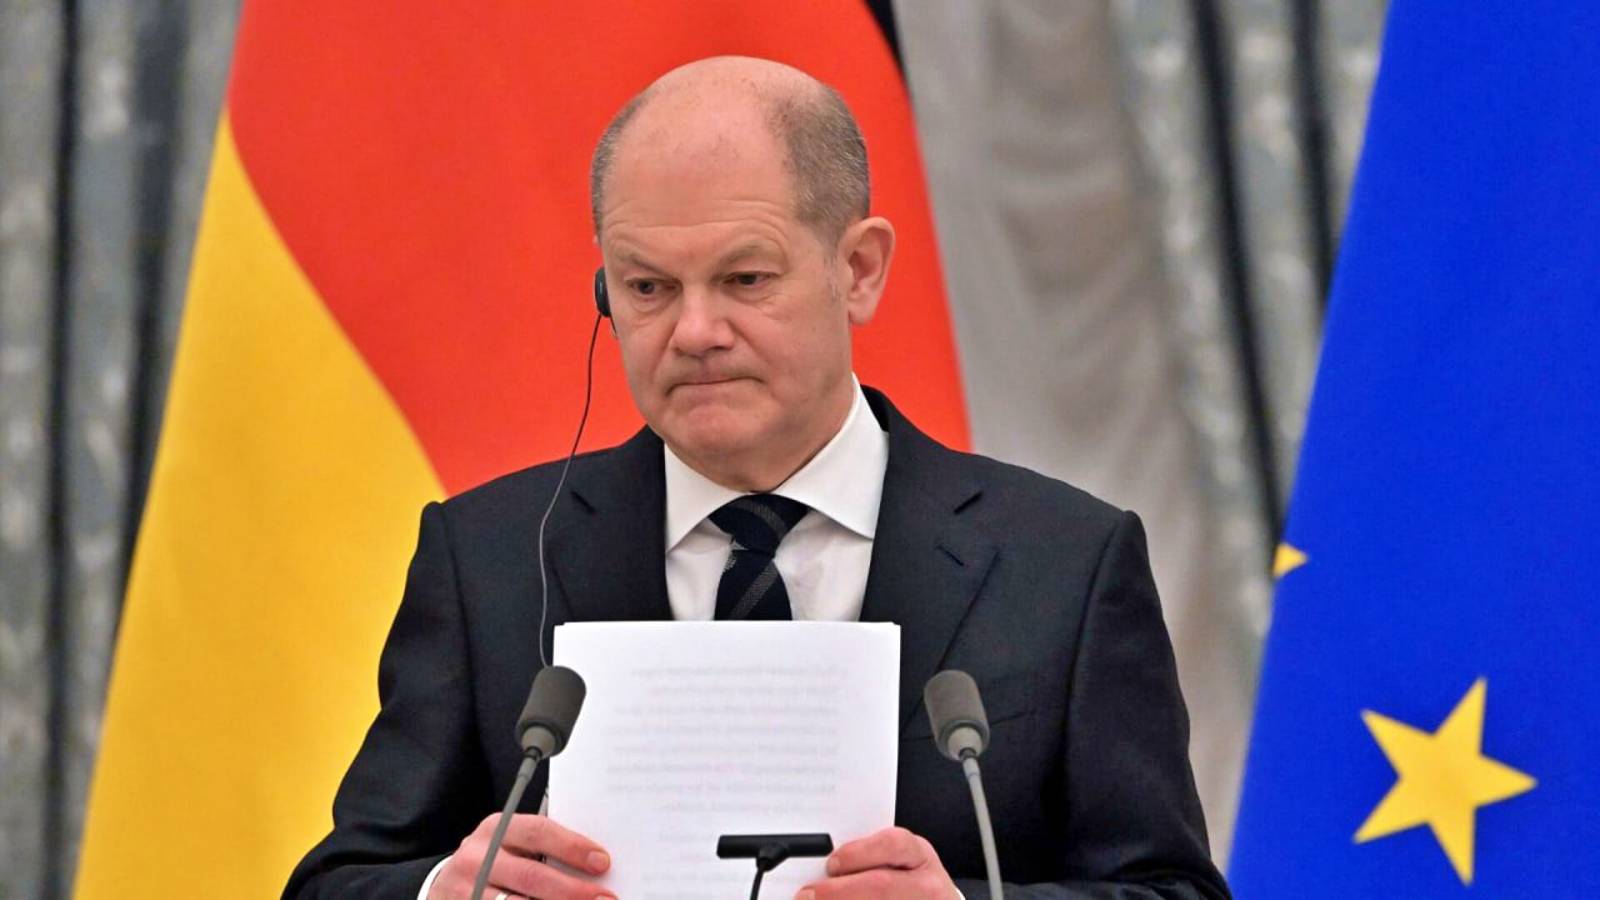 Olaf Scholz Announces Germany's Decision on the War in Ukraine